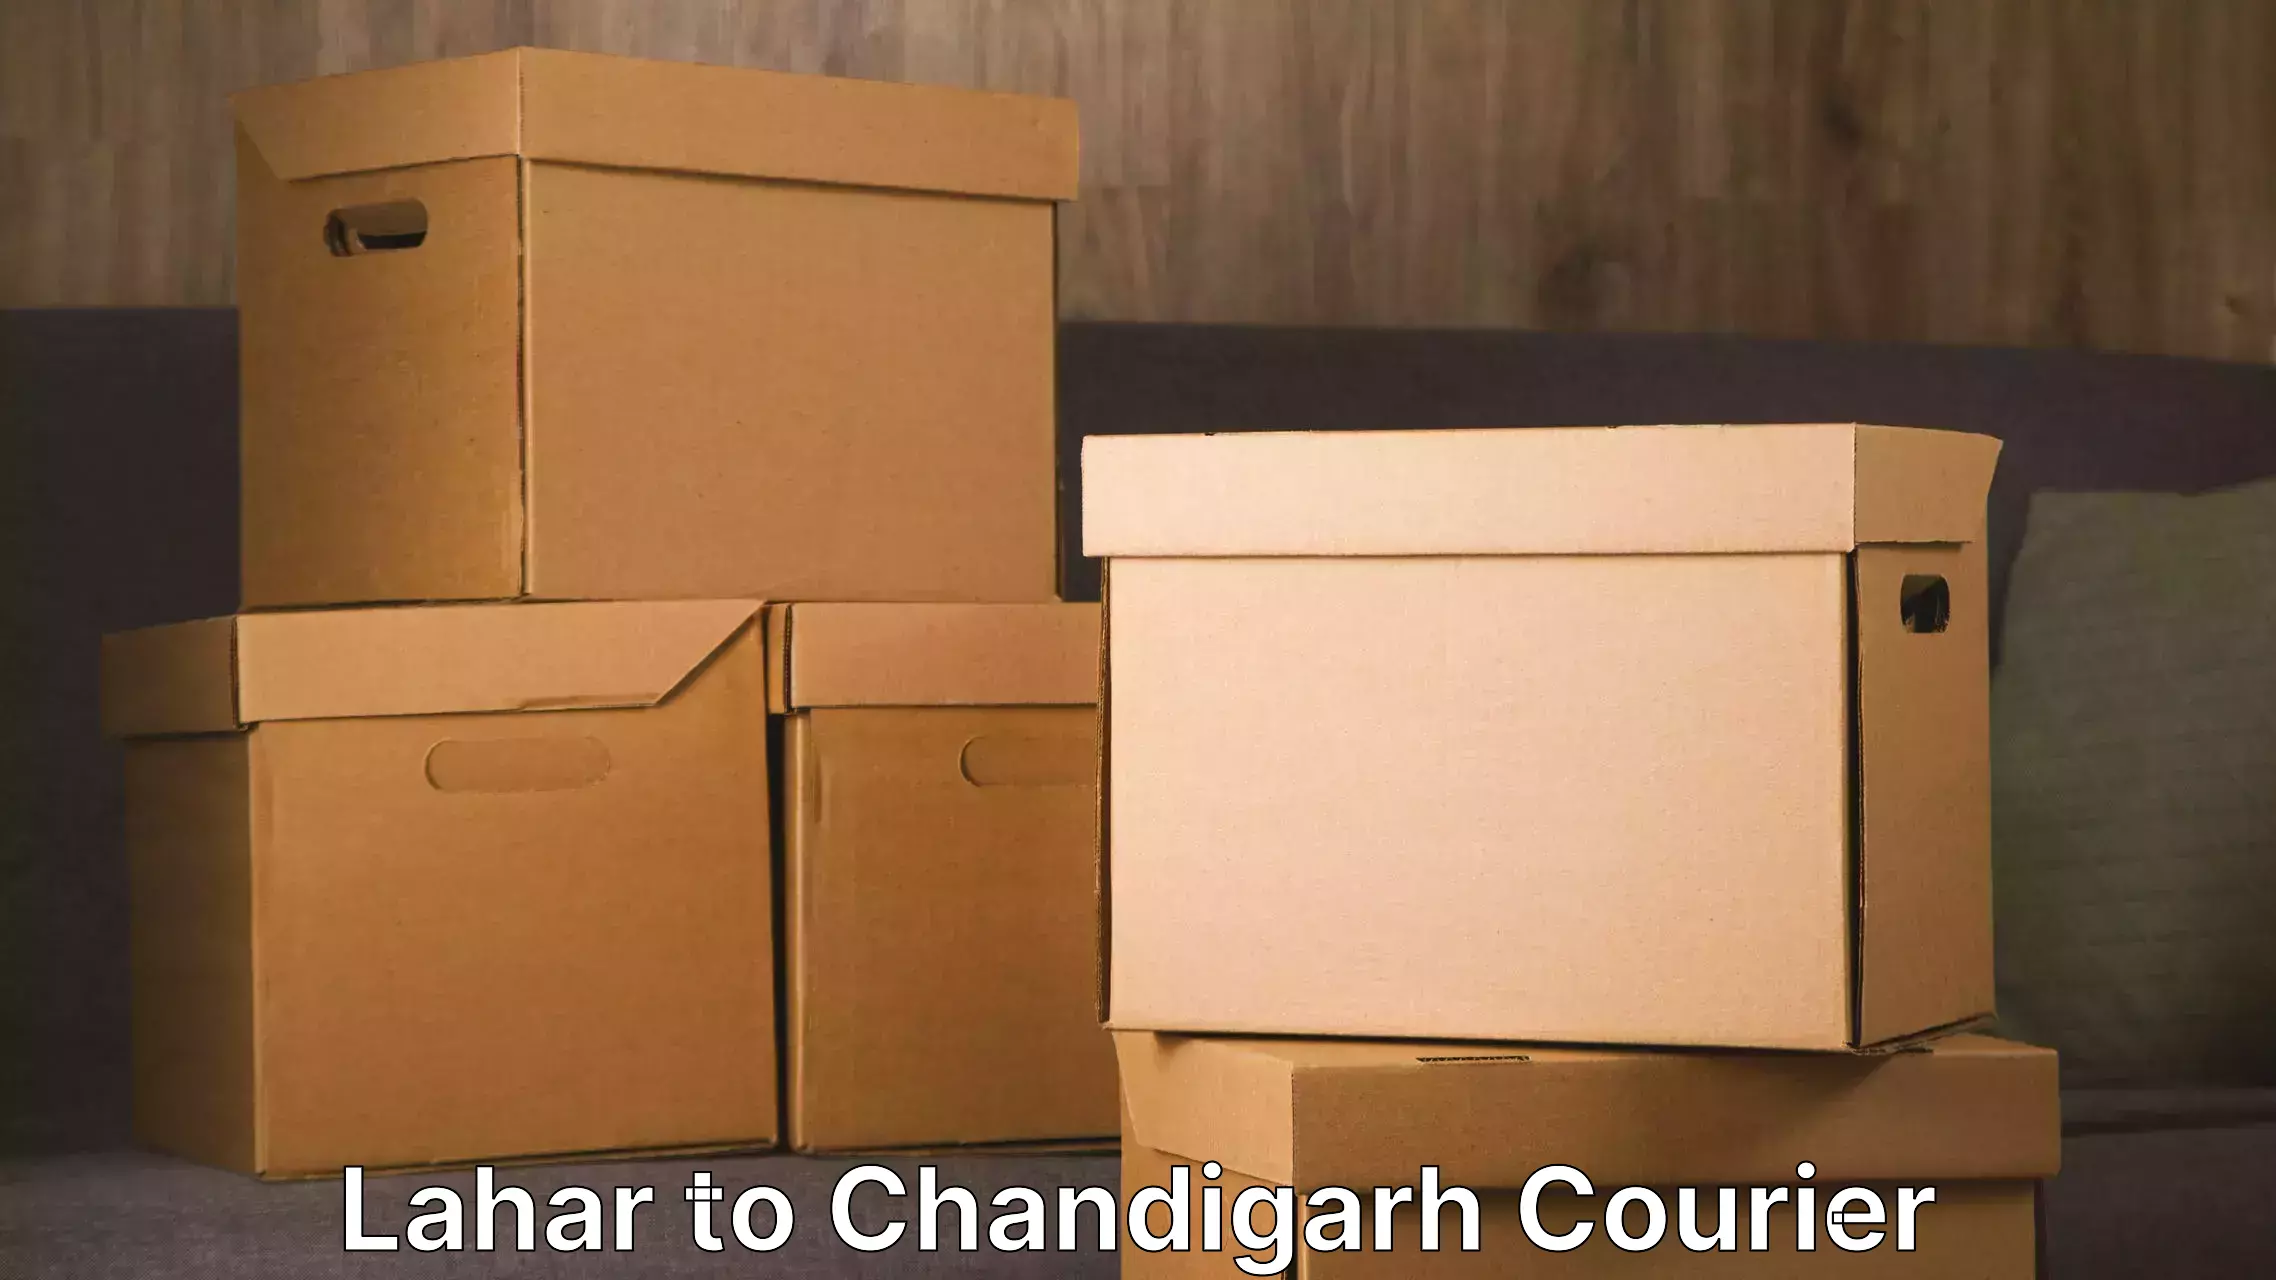 Reliable furniture transport Lahar to Chandigarh